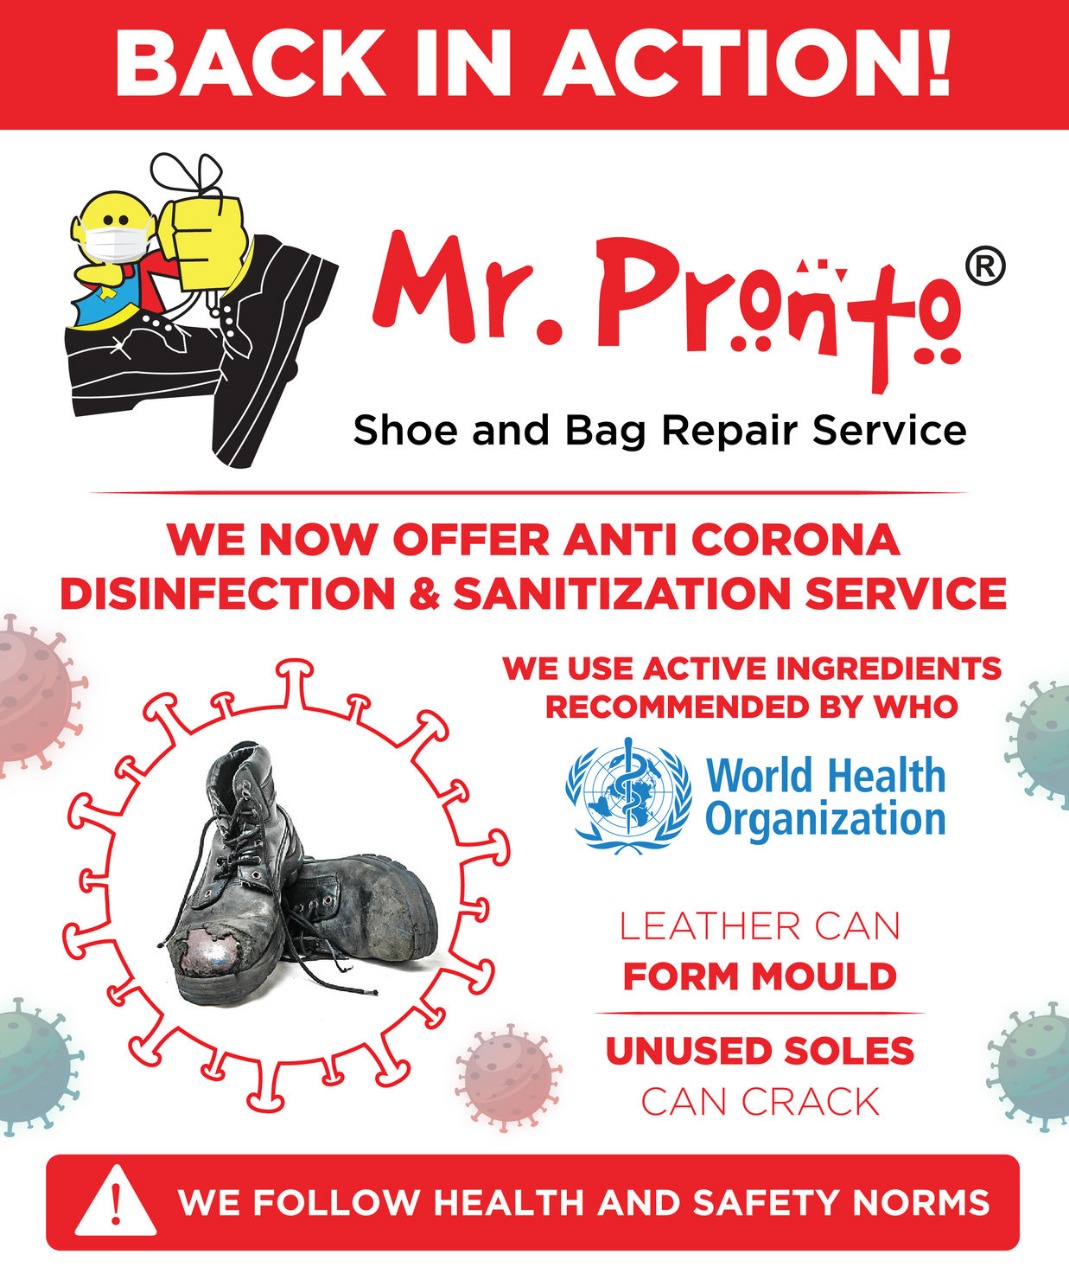 India's Largest shoe and bag repair company